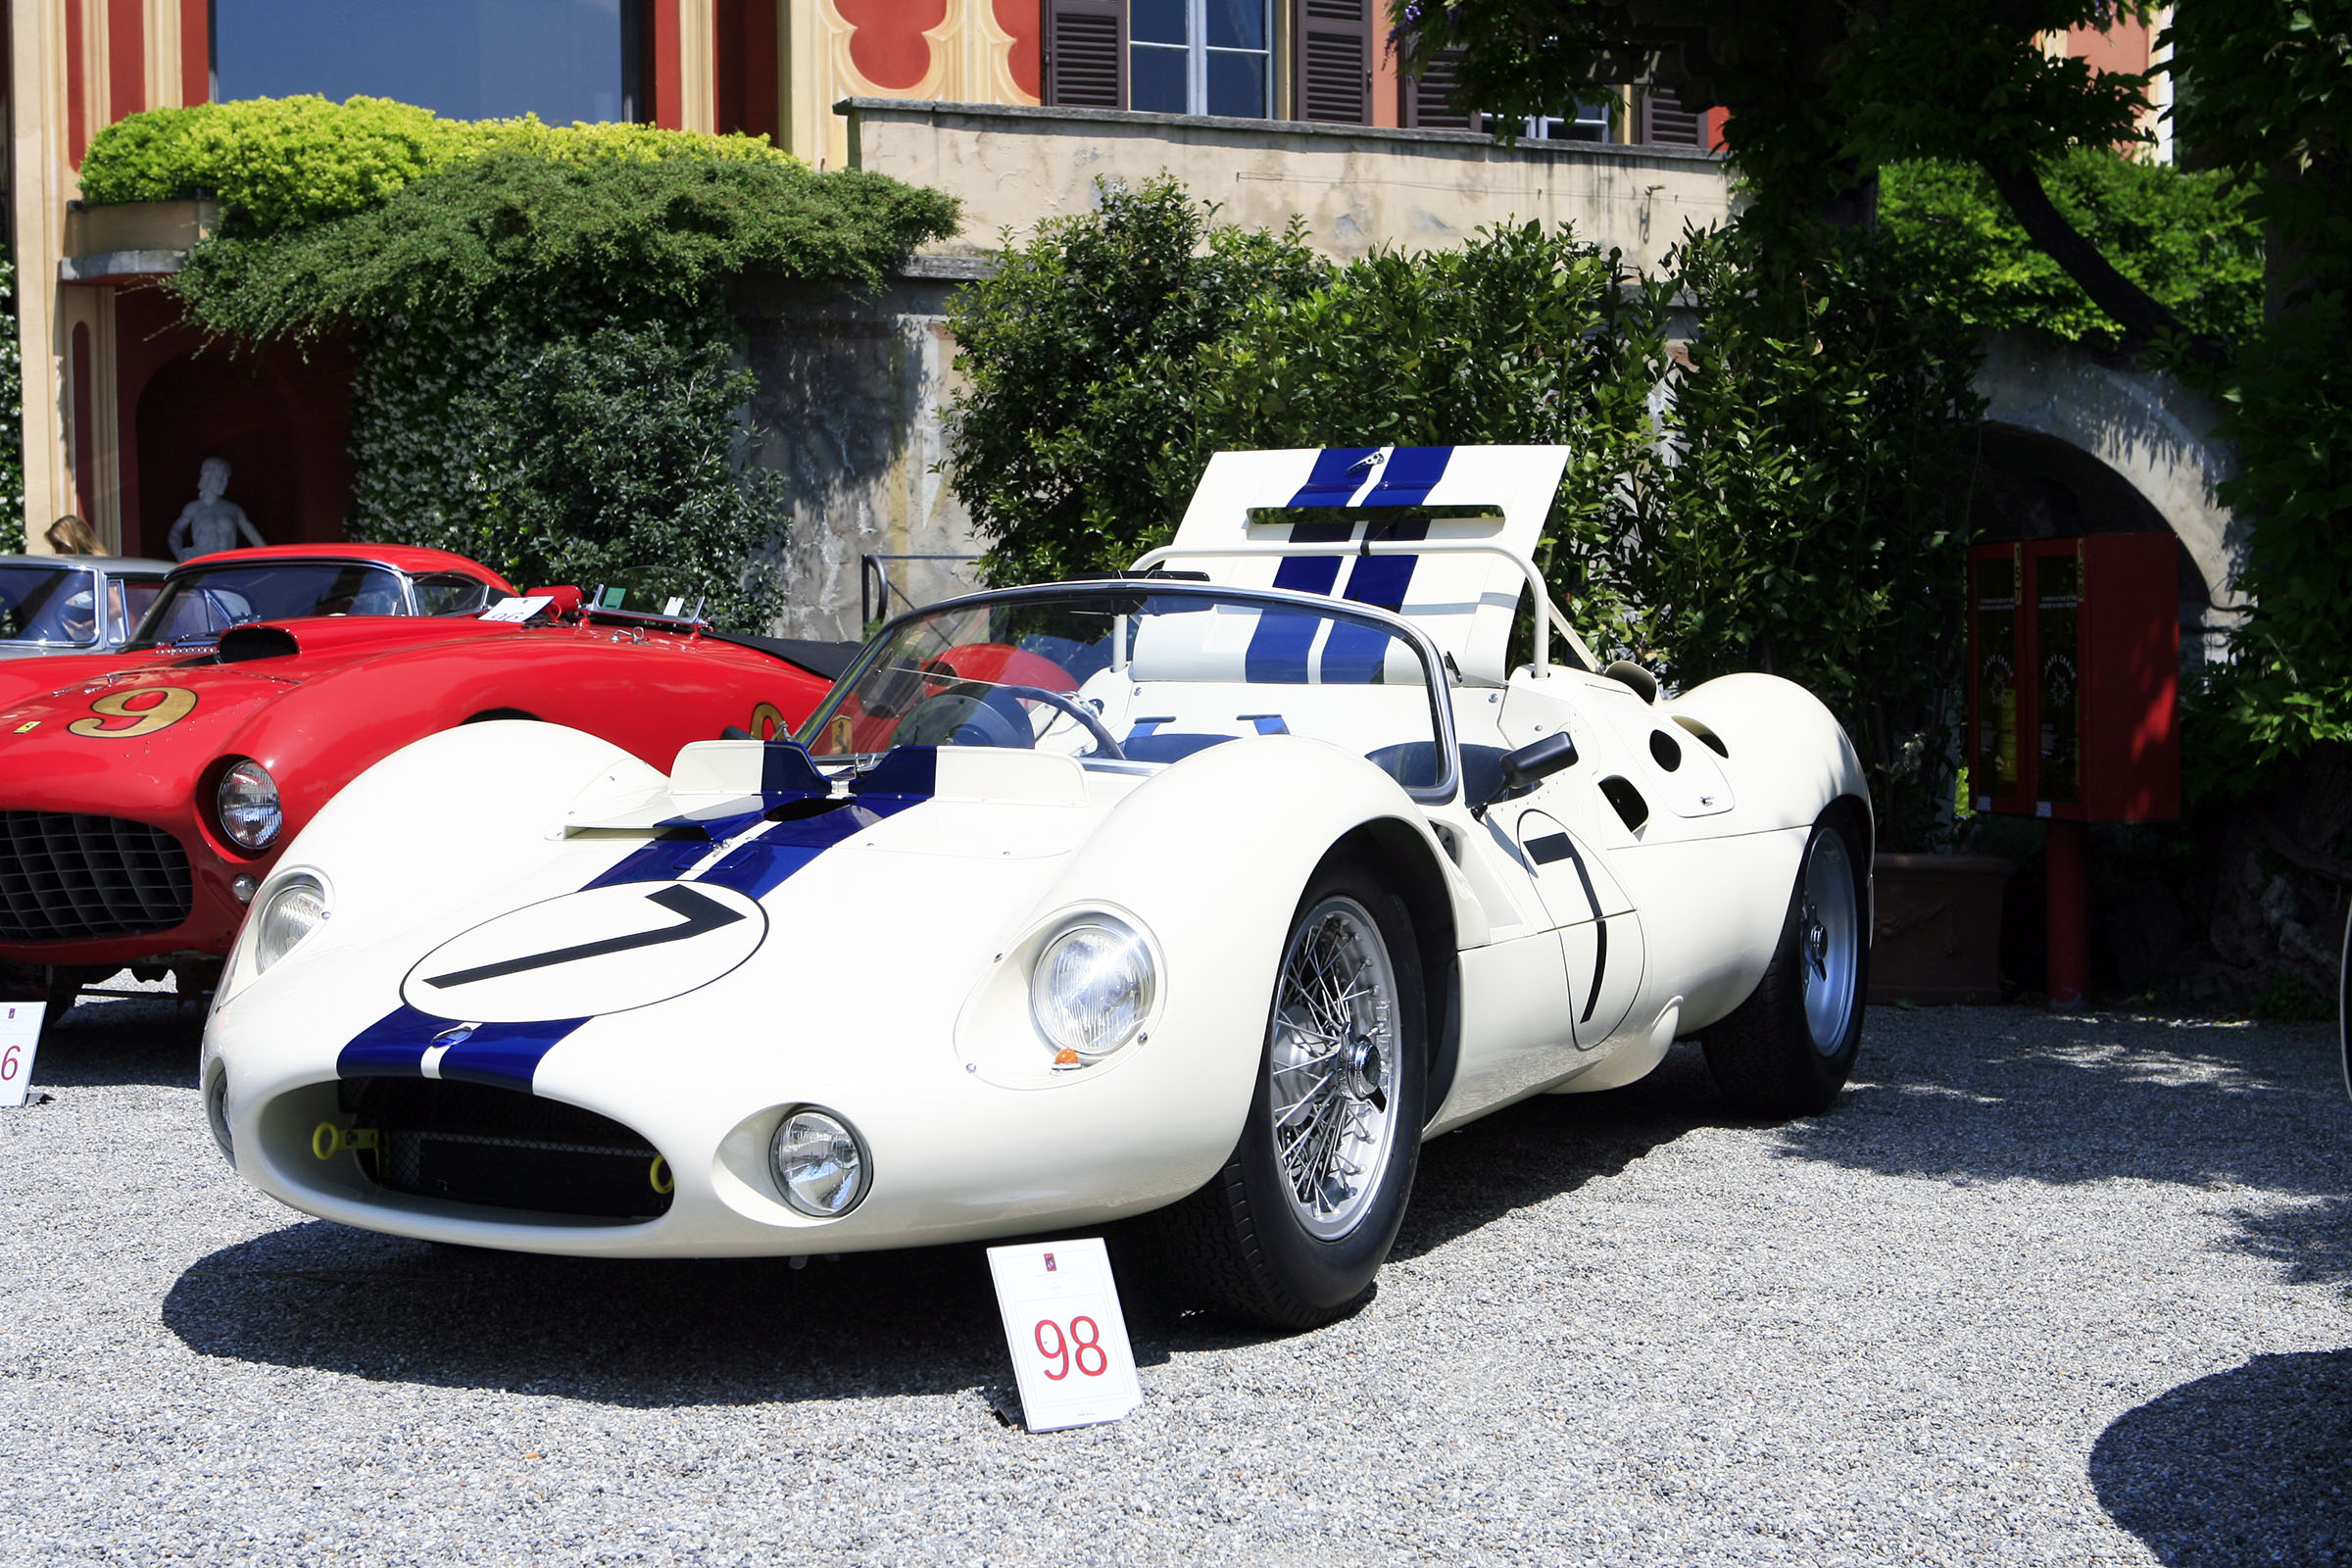 Class H - 98- Colour and Speed Post-War Racing Icons. Maserati 63 by Fiandri (1961)